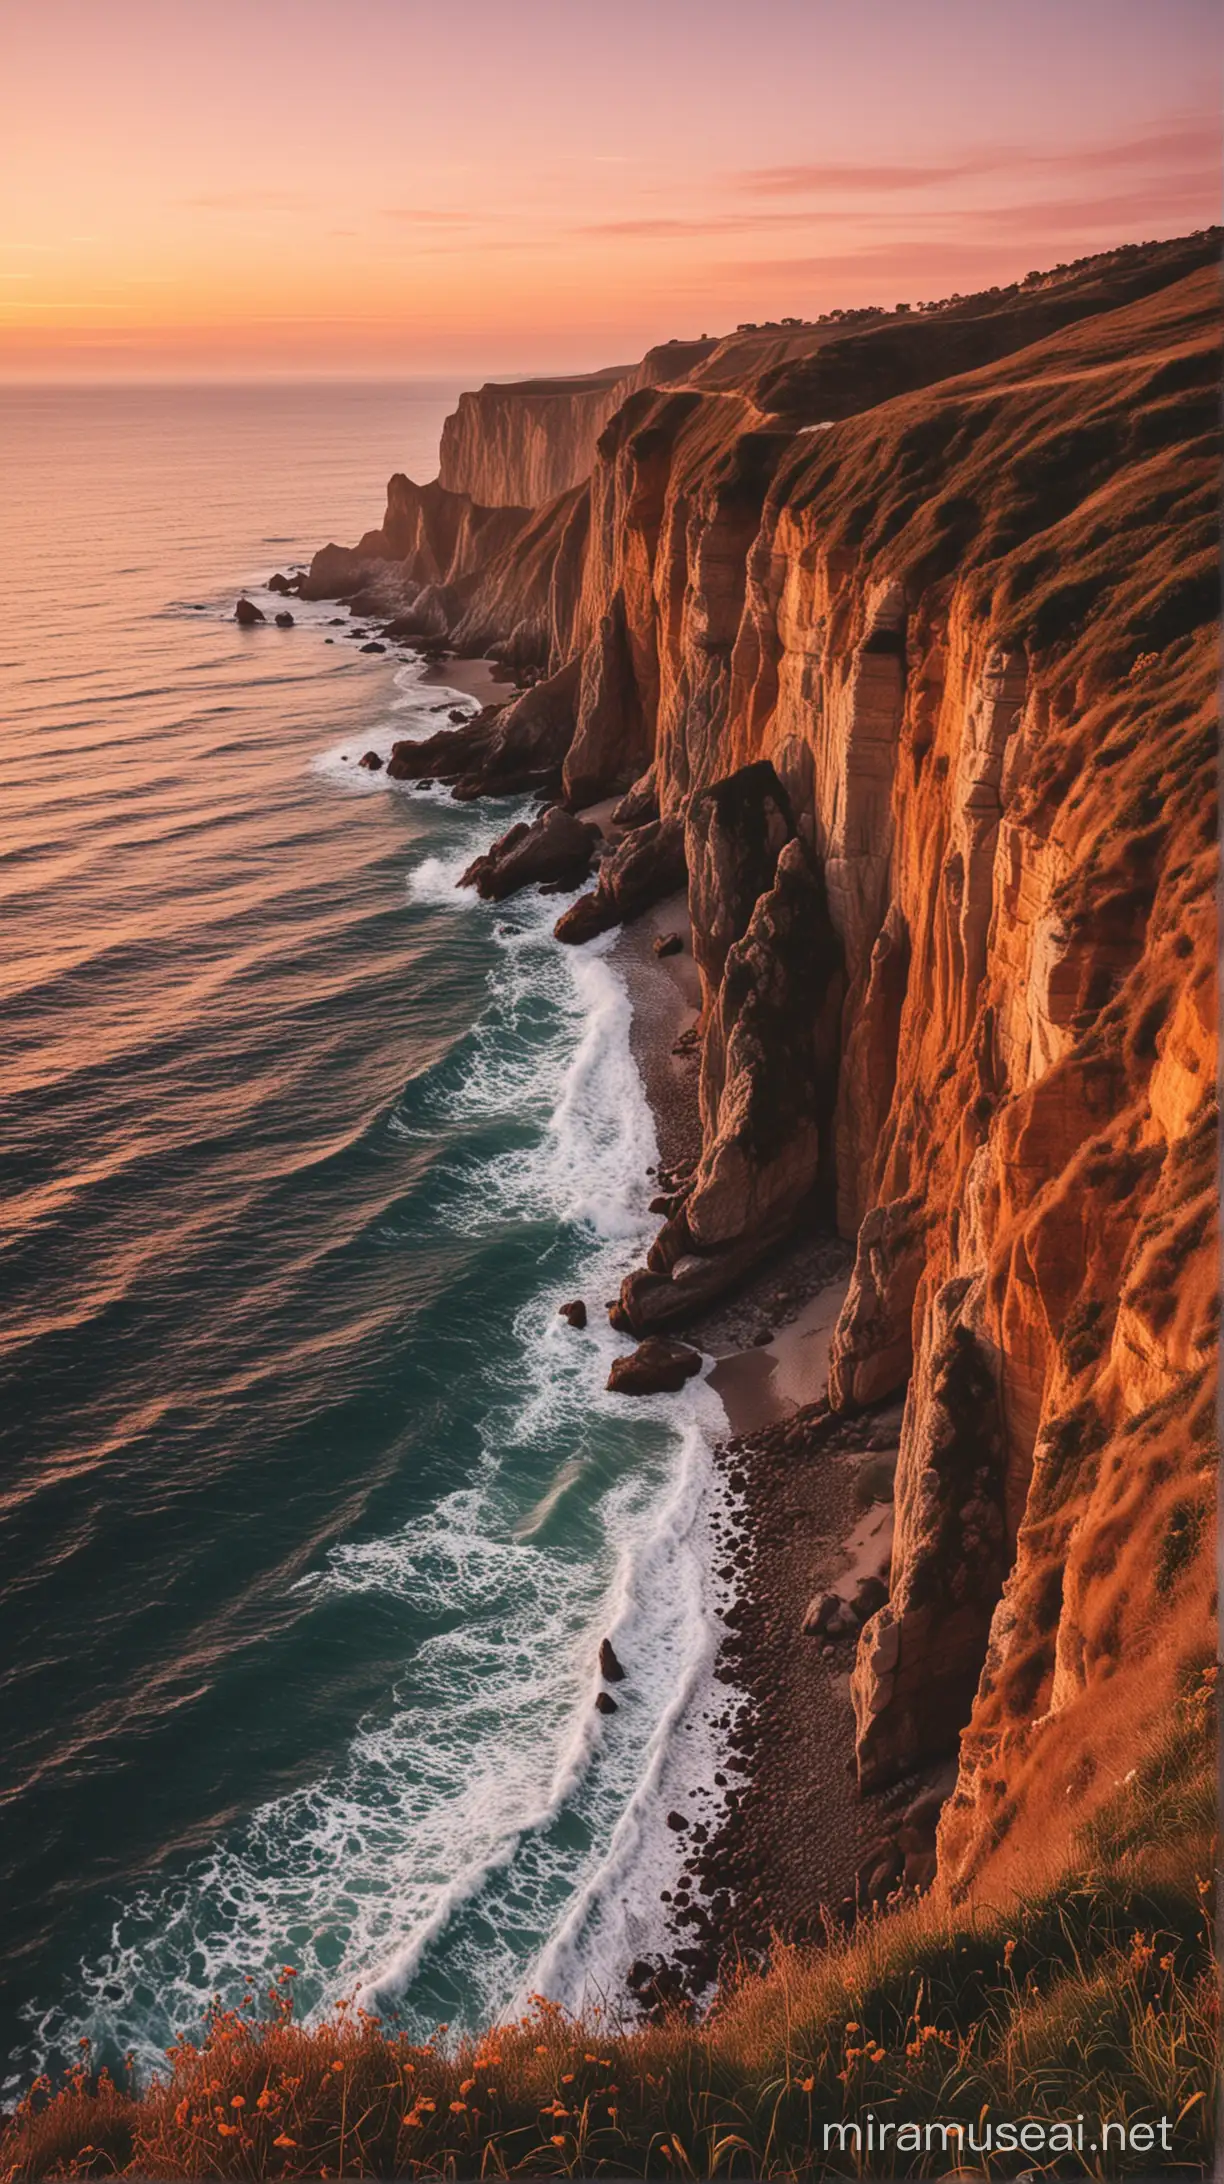 Tranquil Sunset by the Ocean Cliff Serene Nostalgic Vibes